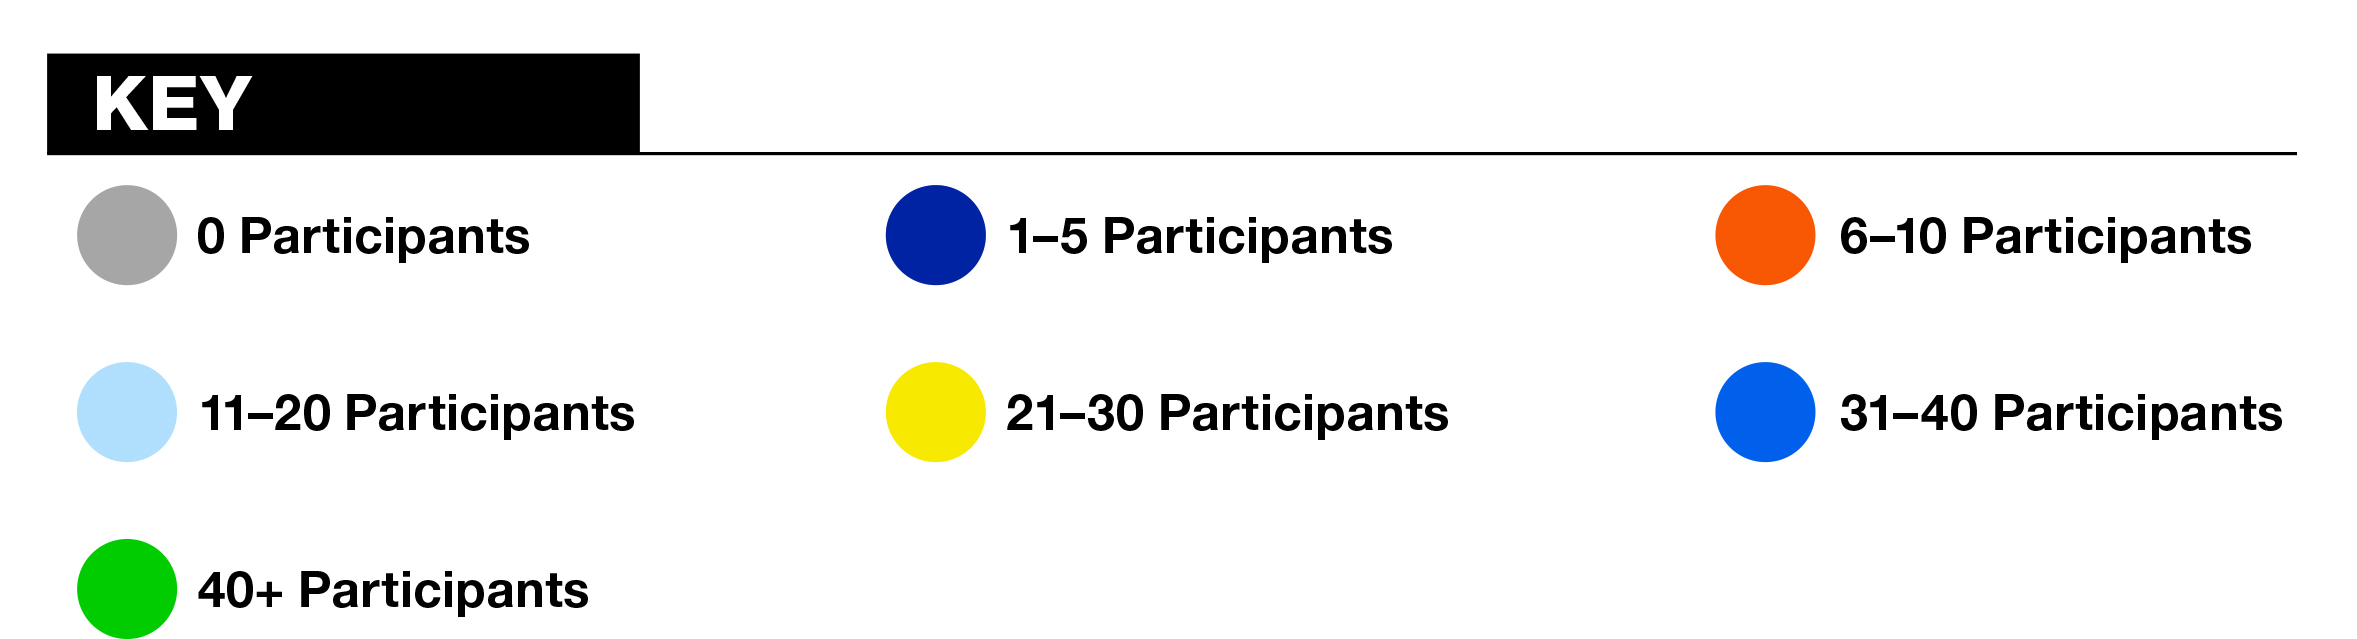 Key for map above: grey means 0 participants, navy blue means 1-5, orange means 6-10, light blue means 11-20, yellow means 21-30, mid-range blue means 31-40, and green means 40+]